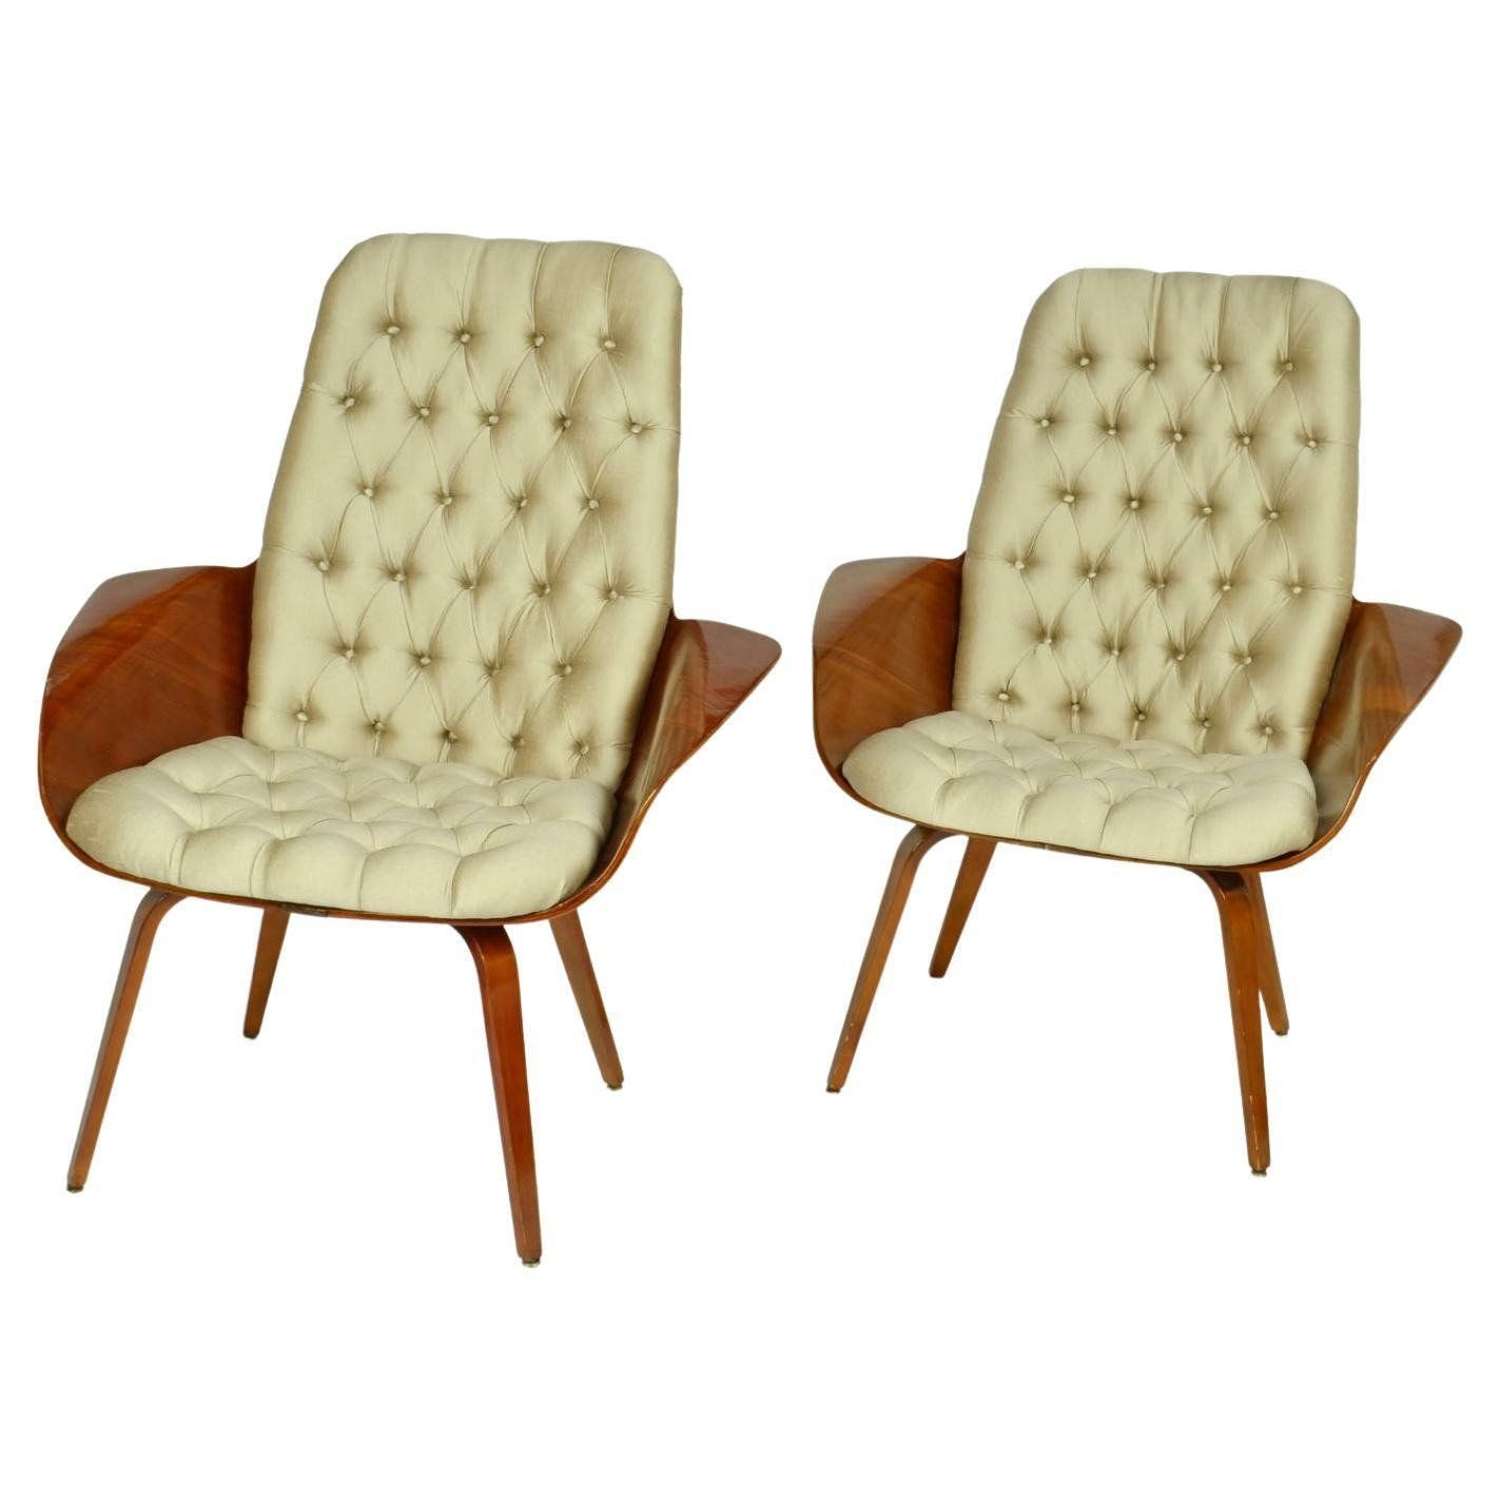 Pair of 'Mrs' Lounge Chairs by George Mulhauser for Plycraft